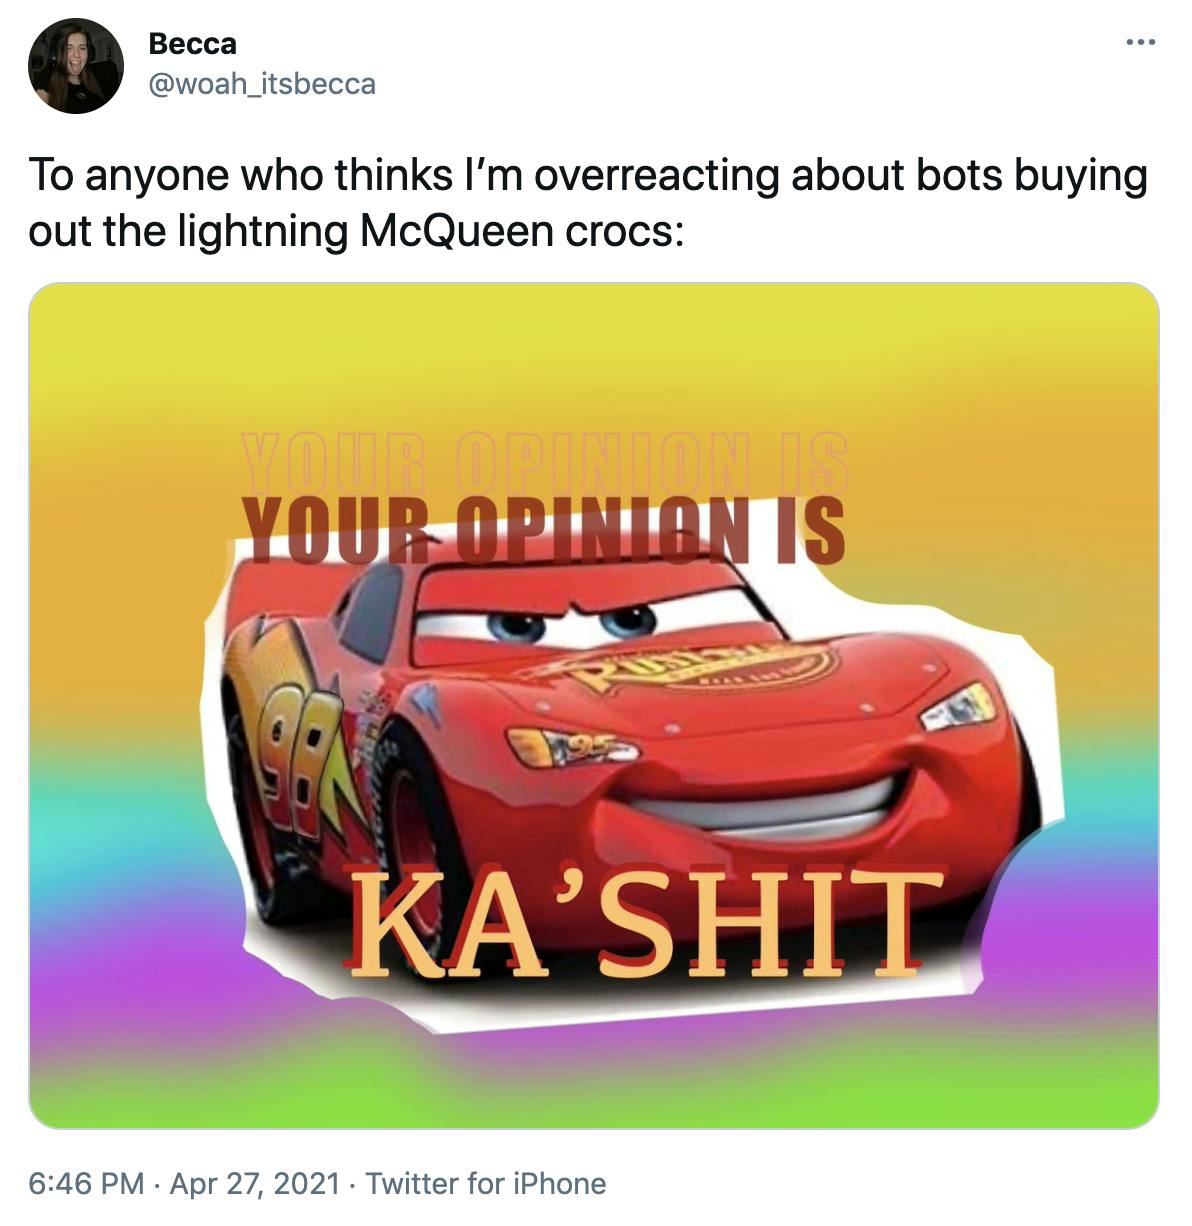 'To anyone who thinks I’m overreacting about bots buying out the lightning McQueen crocs:' image of a red anthropomorphic car on a rainbow background with the test 'your opinion is ka'shit'